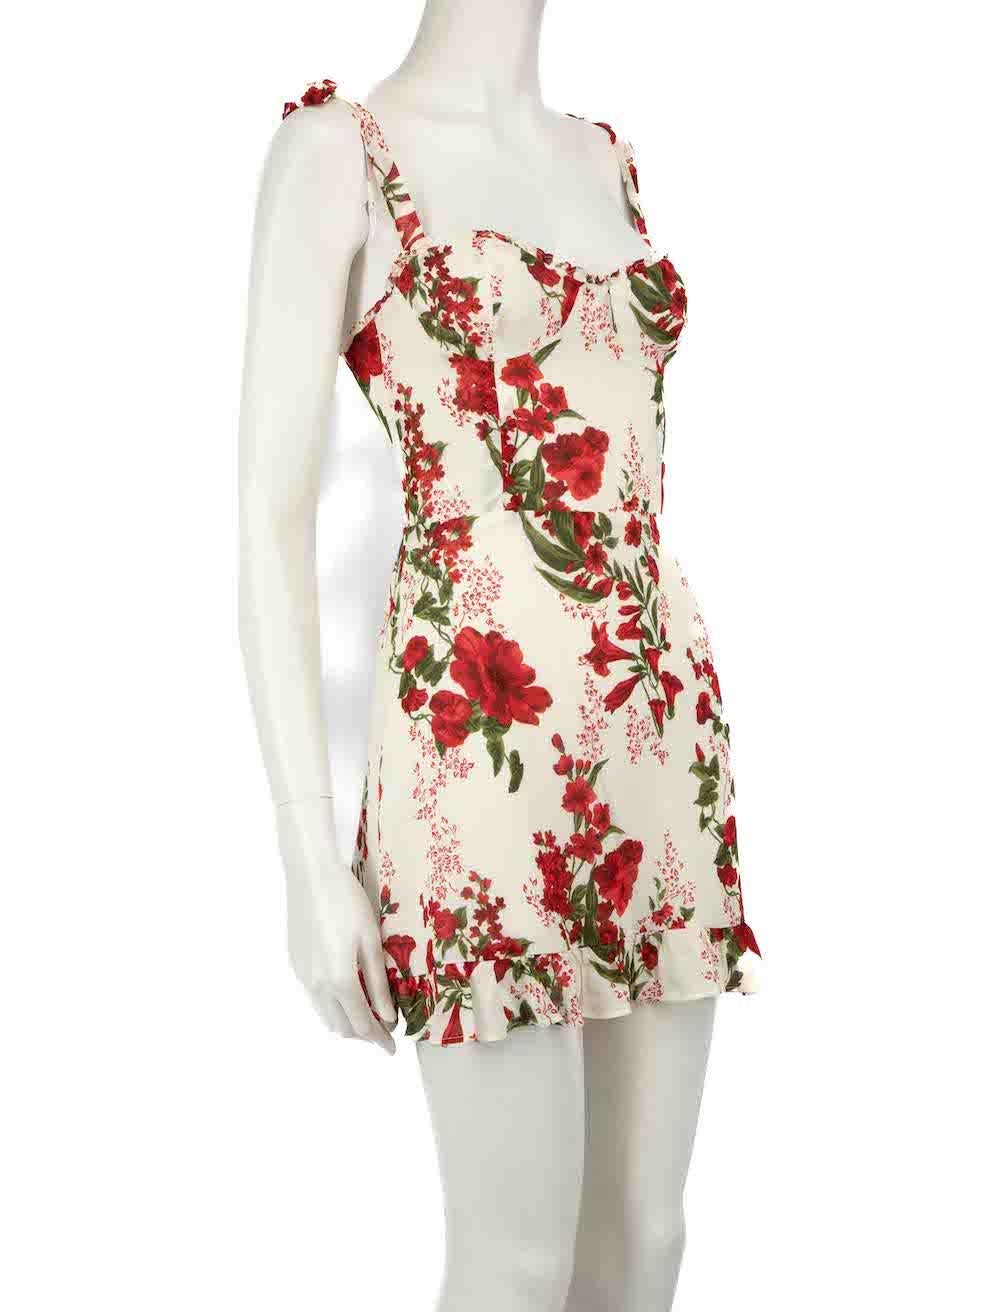 CONDITION is Very good. Minimal wear to dress is evident. Minimal wear with a light musty odour due to poor storage on this used Reformation designer resale item.
 
 
 
 Details
 
 
 Ecru
 
 Viscose
 
 Dress
 
 Floral pattern
 
 Mini
 
 Sleeveless
